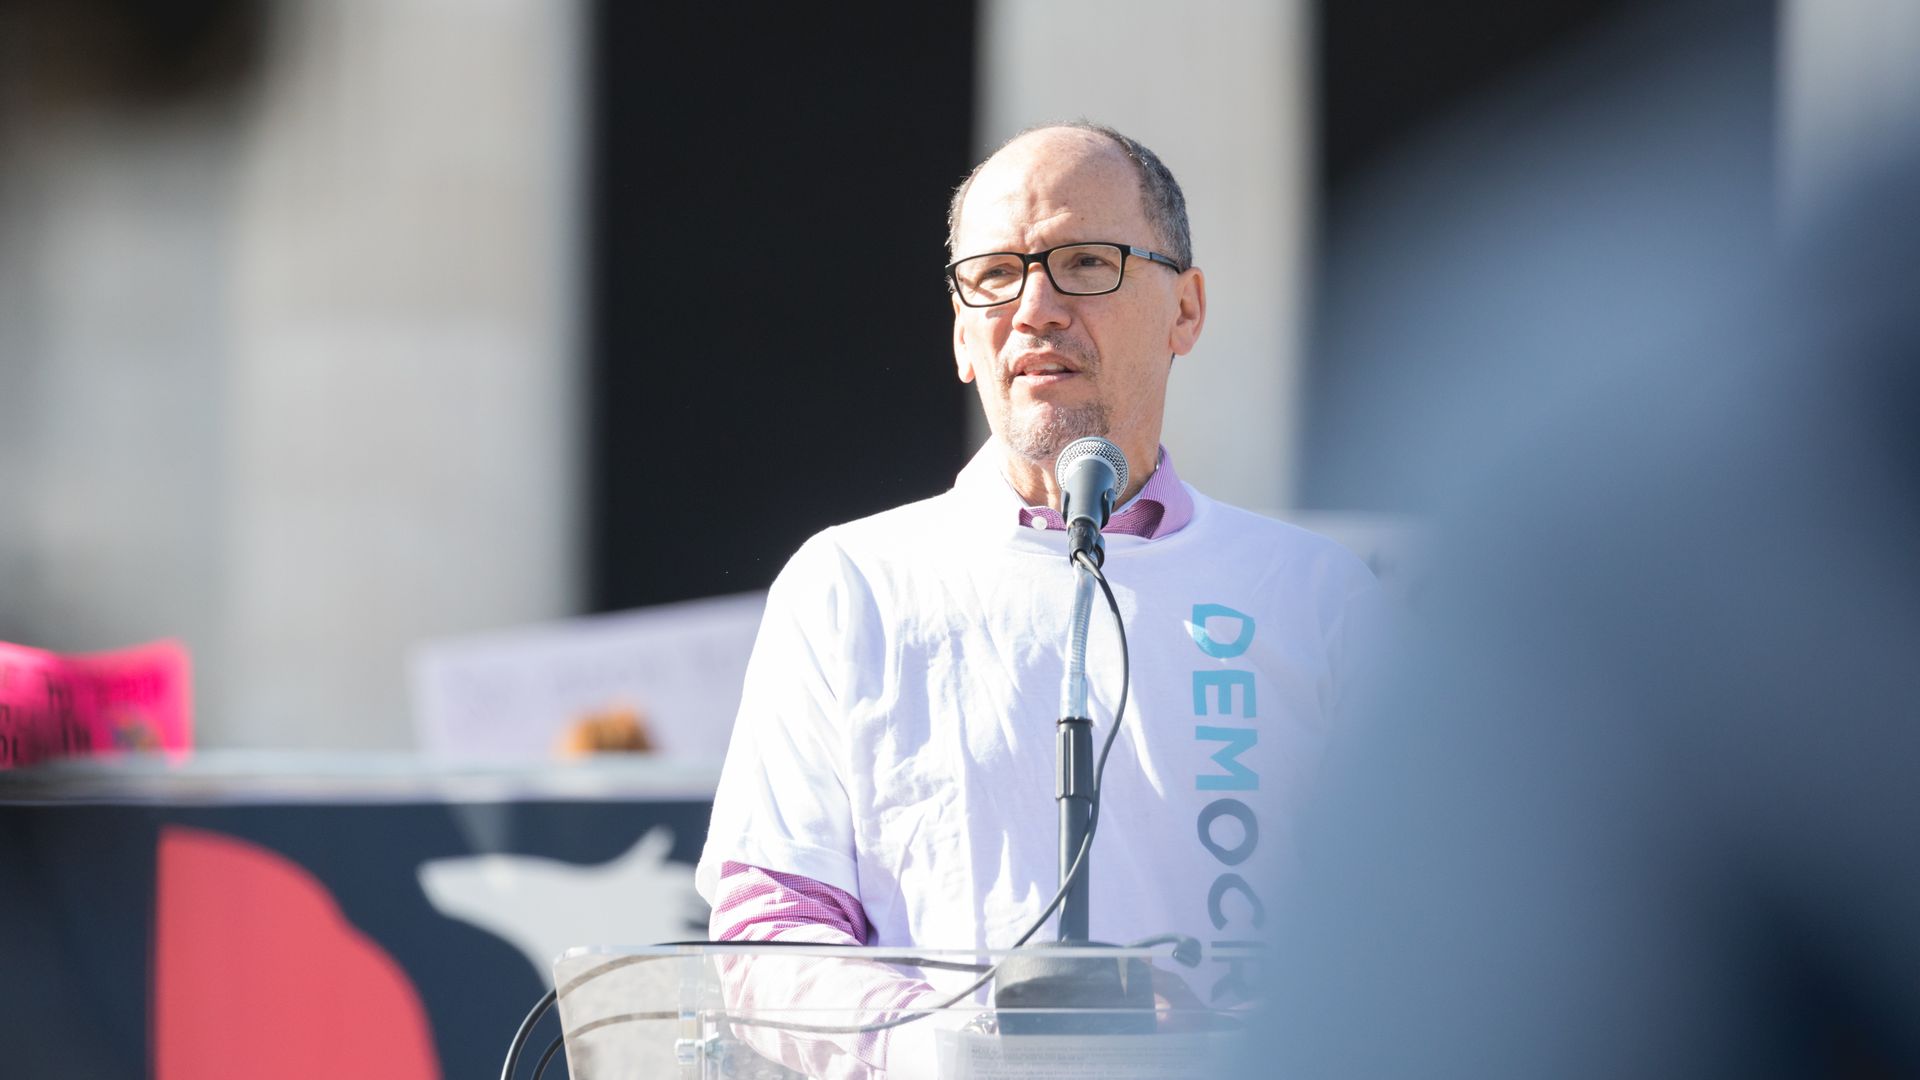 Tom Perez speaks at a microphone.